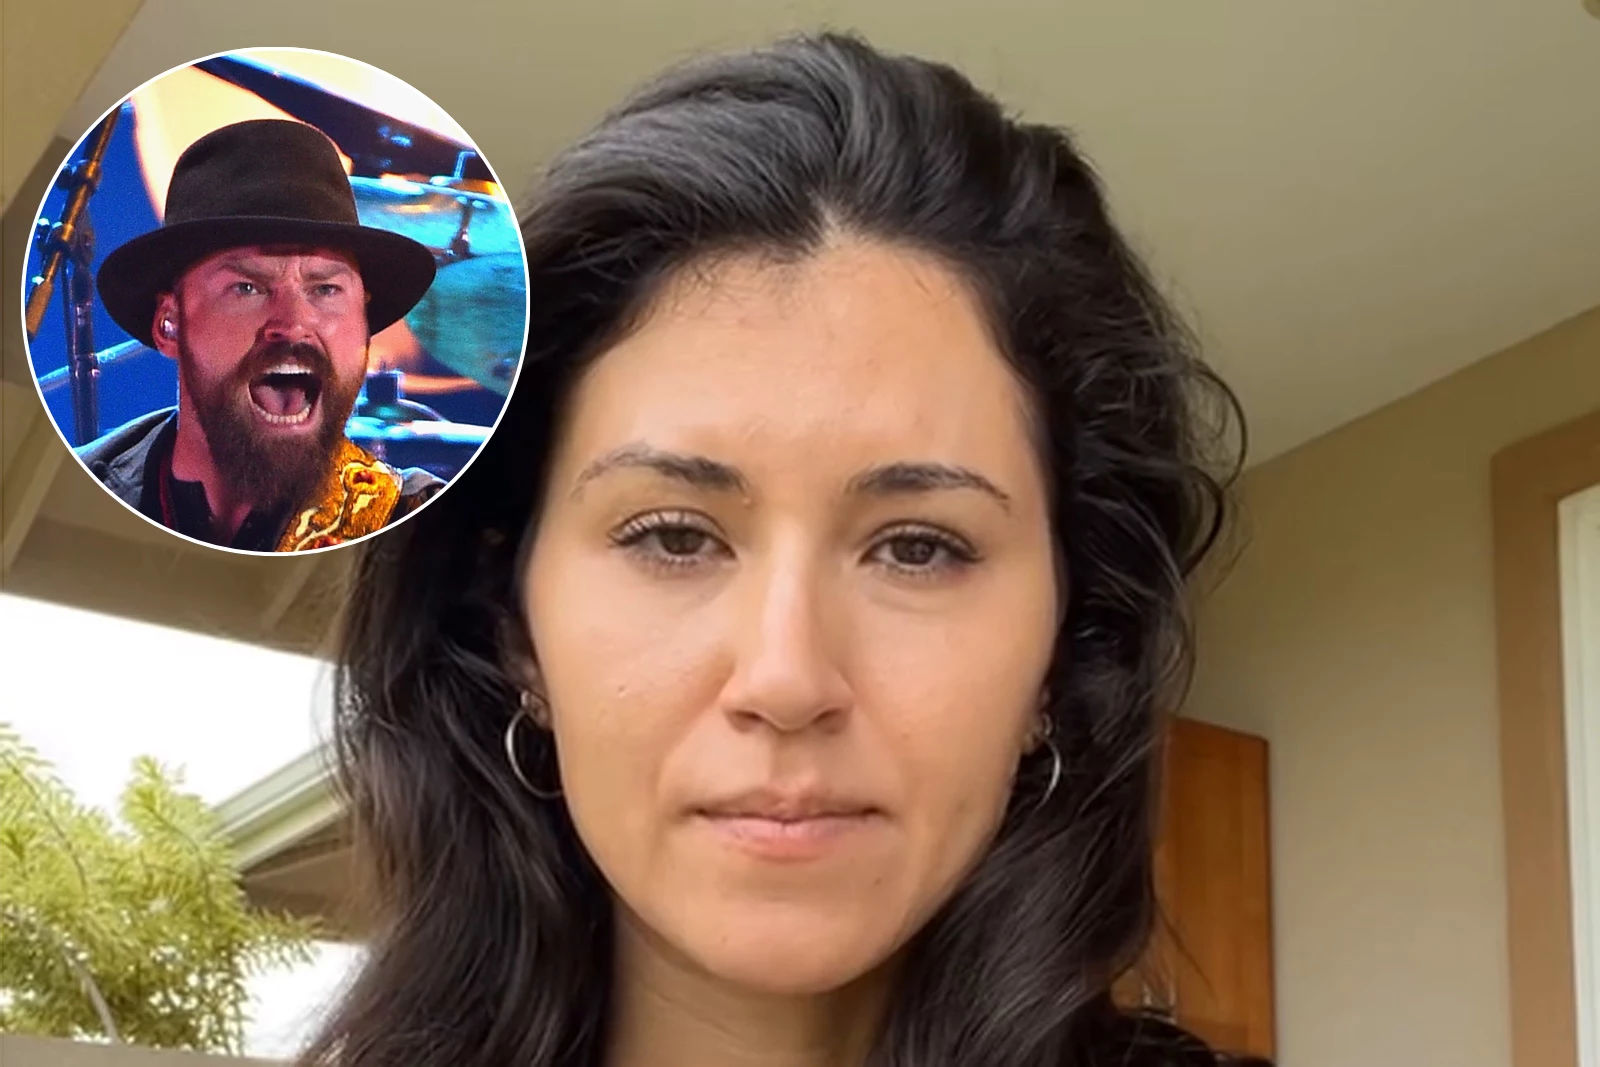 Zac Brown’s Ex-Wife Fires Back After He Files for Restraining Order: ‘I Will Not Be Silenced’